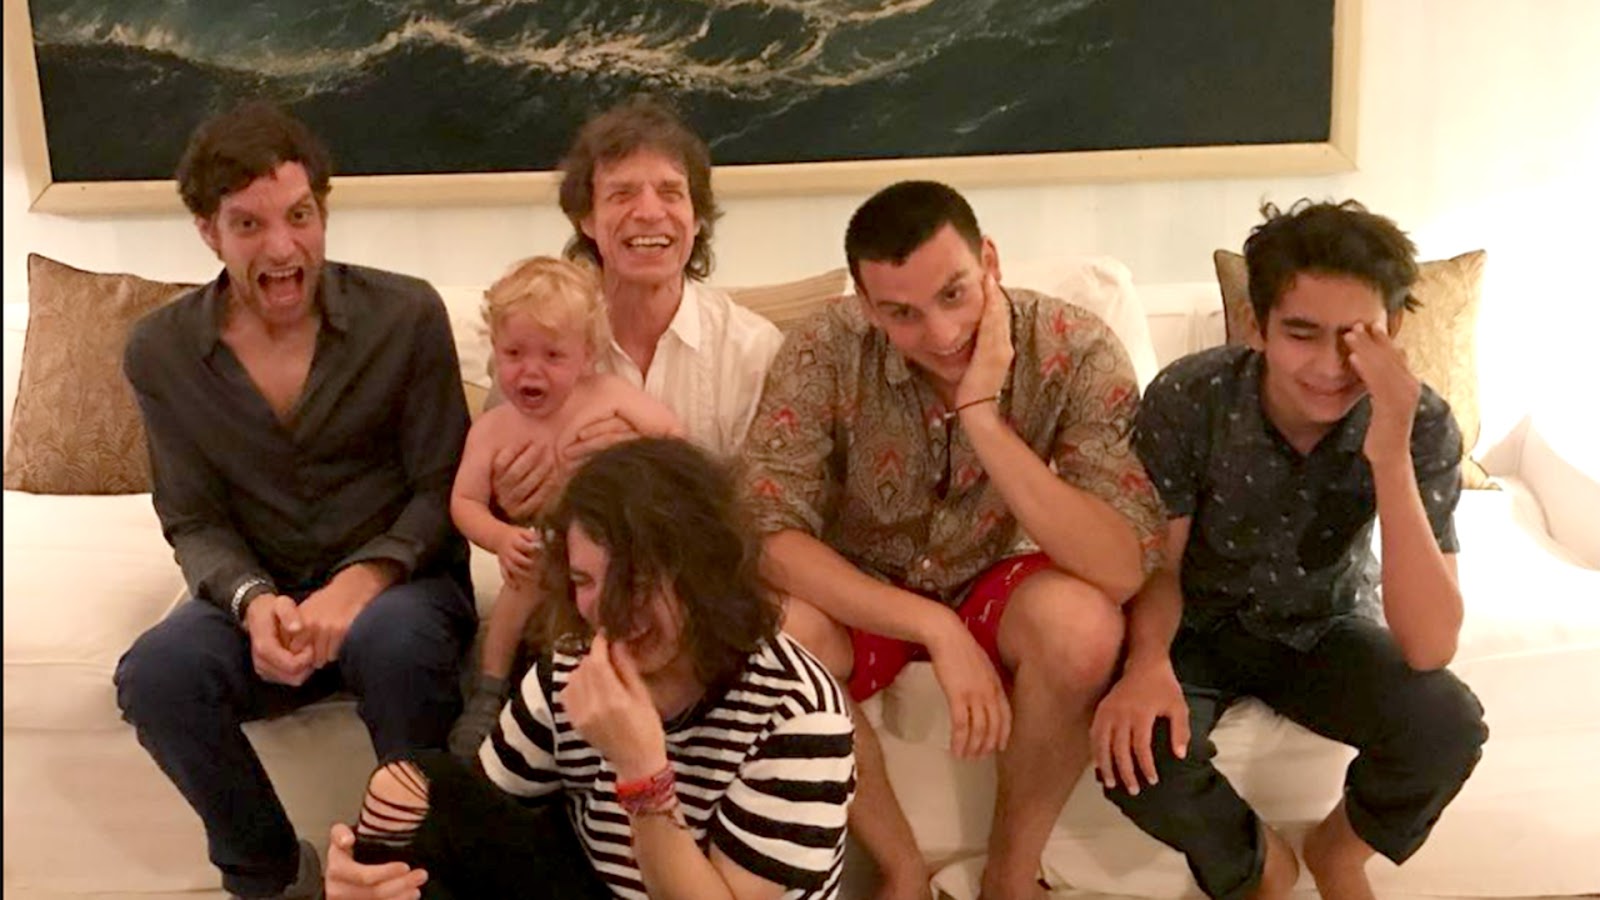 Mick Jagger poses for pic with all 4 sons on his 75th birthday